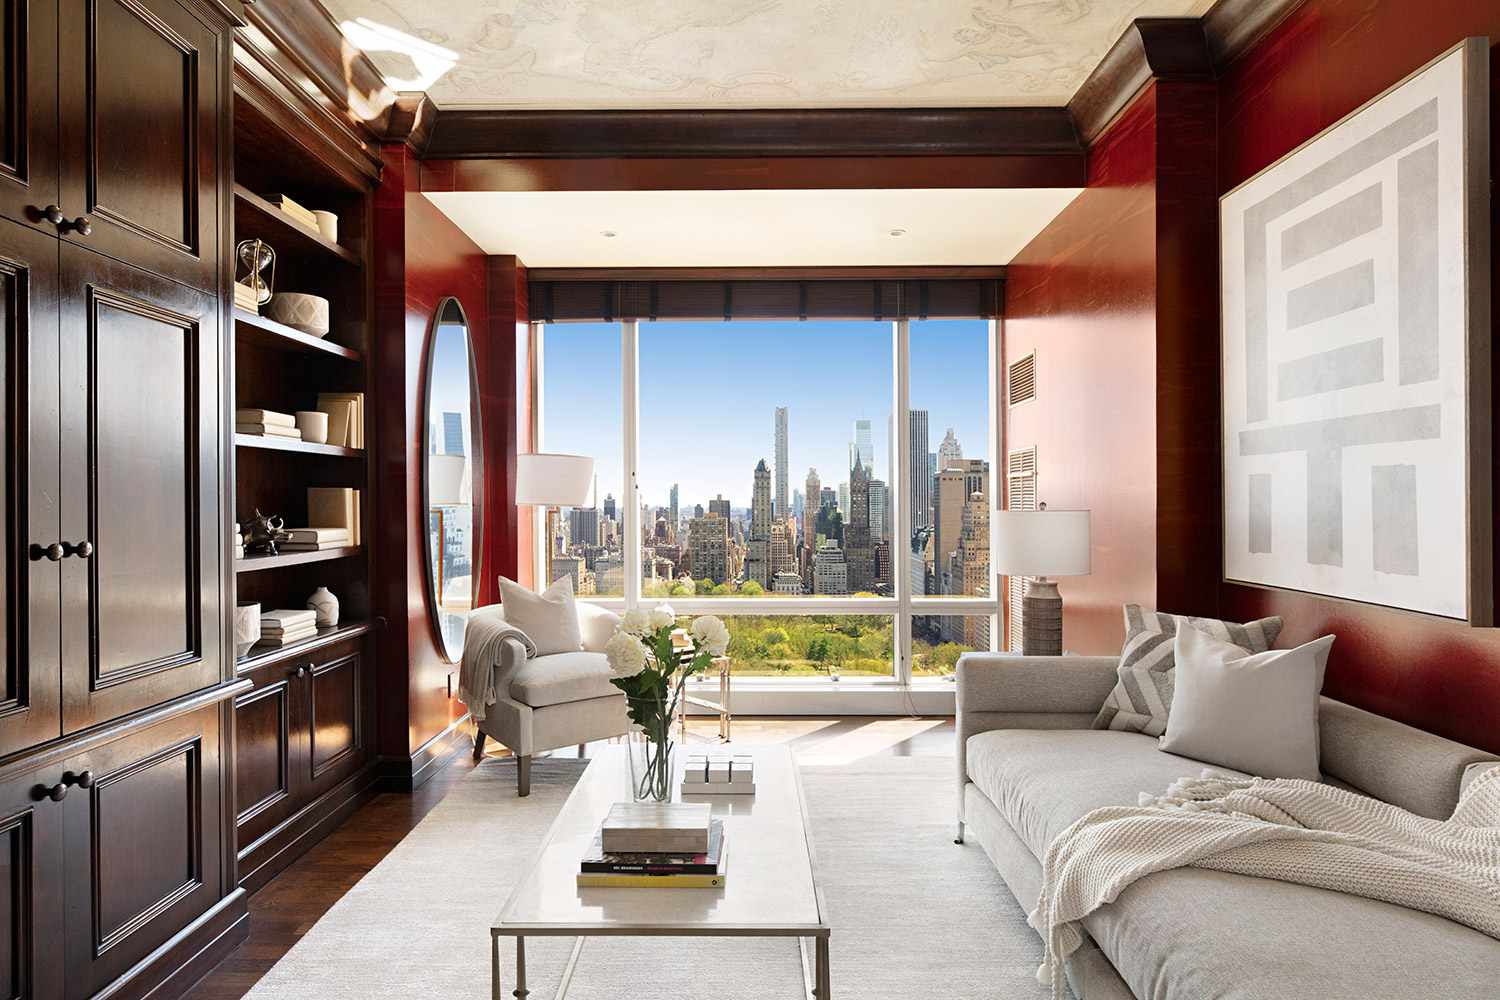 Janet Jackson Lists Her Decades-Long NYC Condominium for $8.9 Million